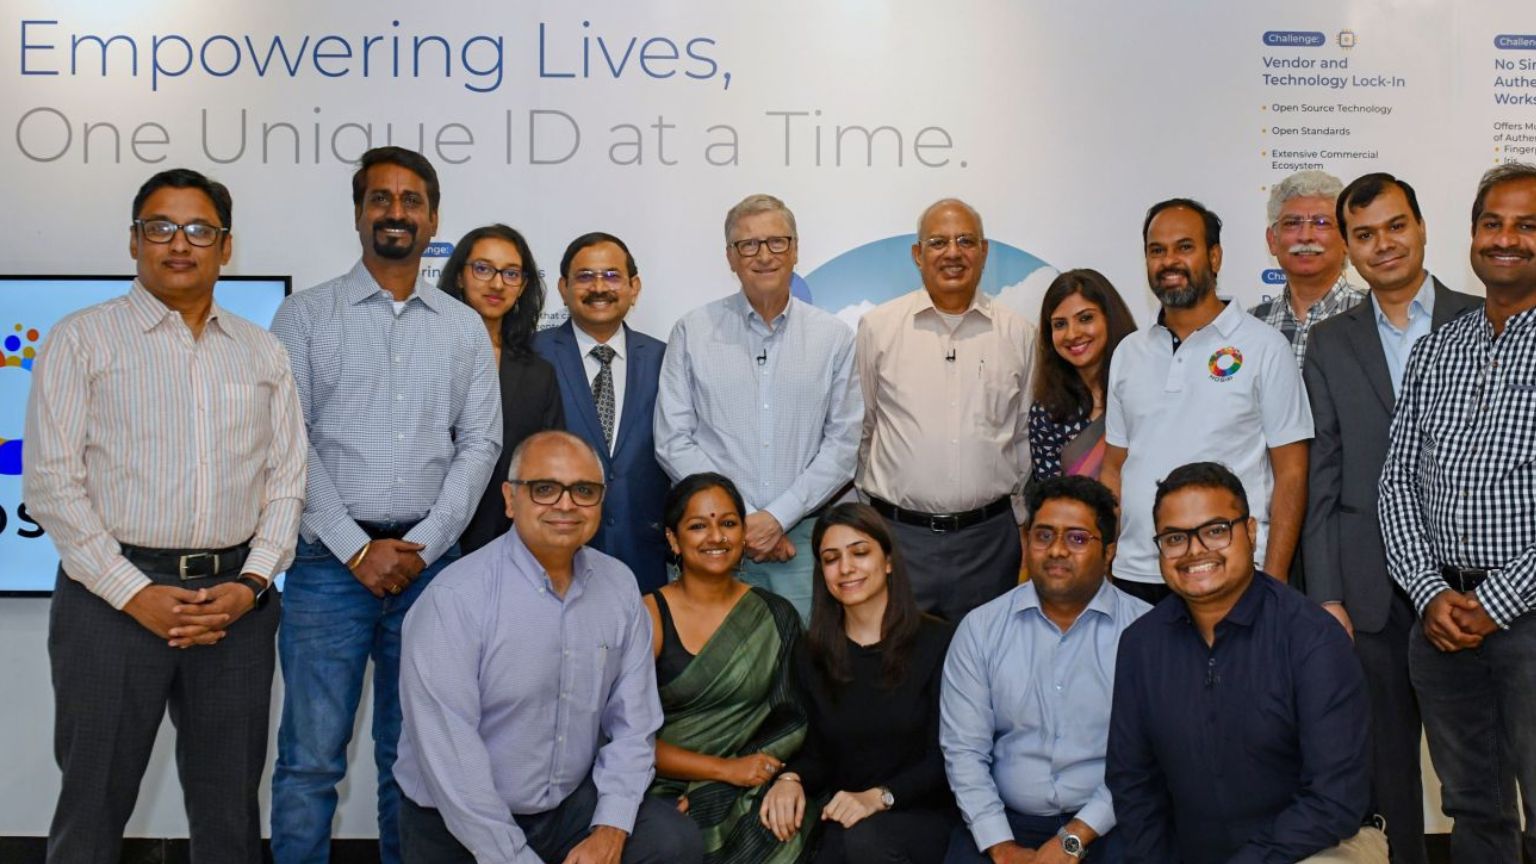 Bill Gates checks in with the digital ID project he’s funding in Bangalore